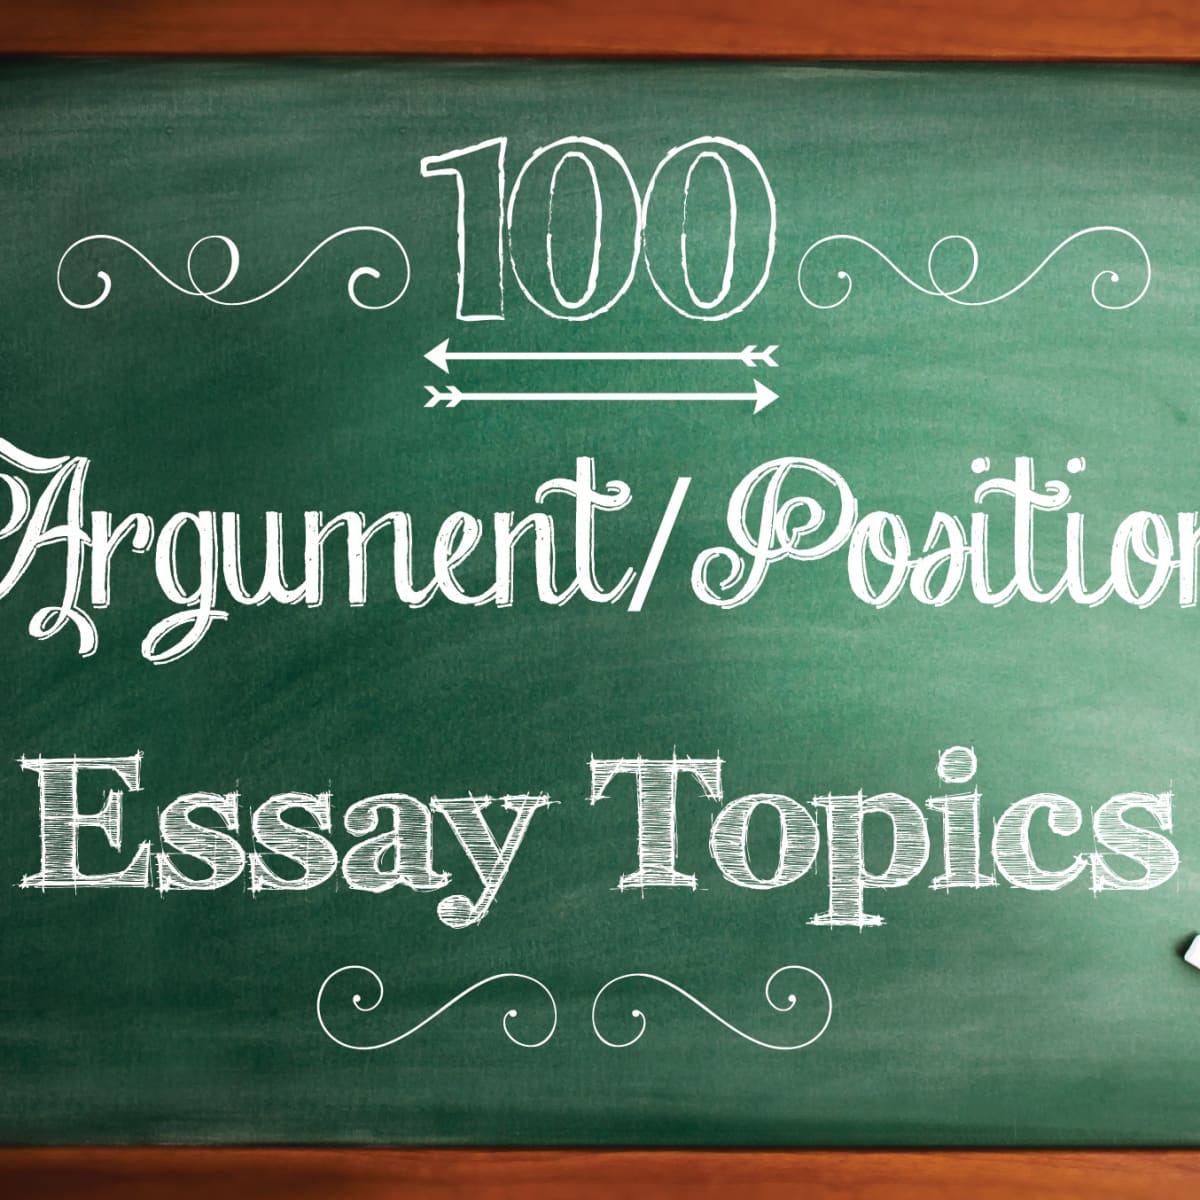 political science essay questions and answers